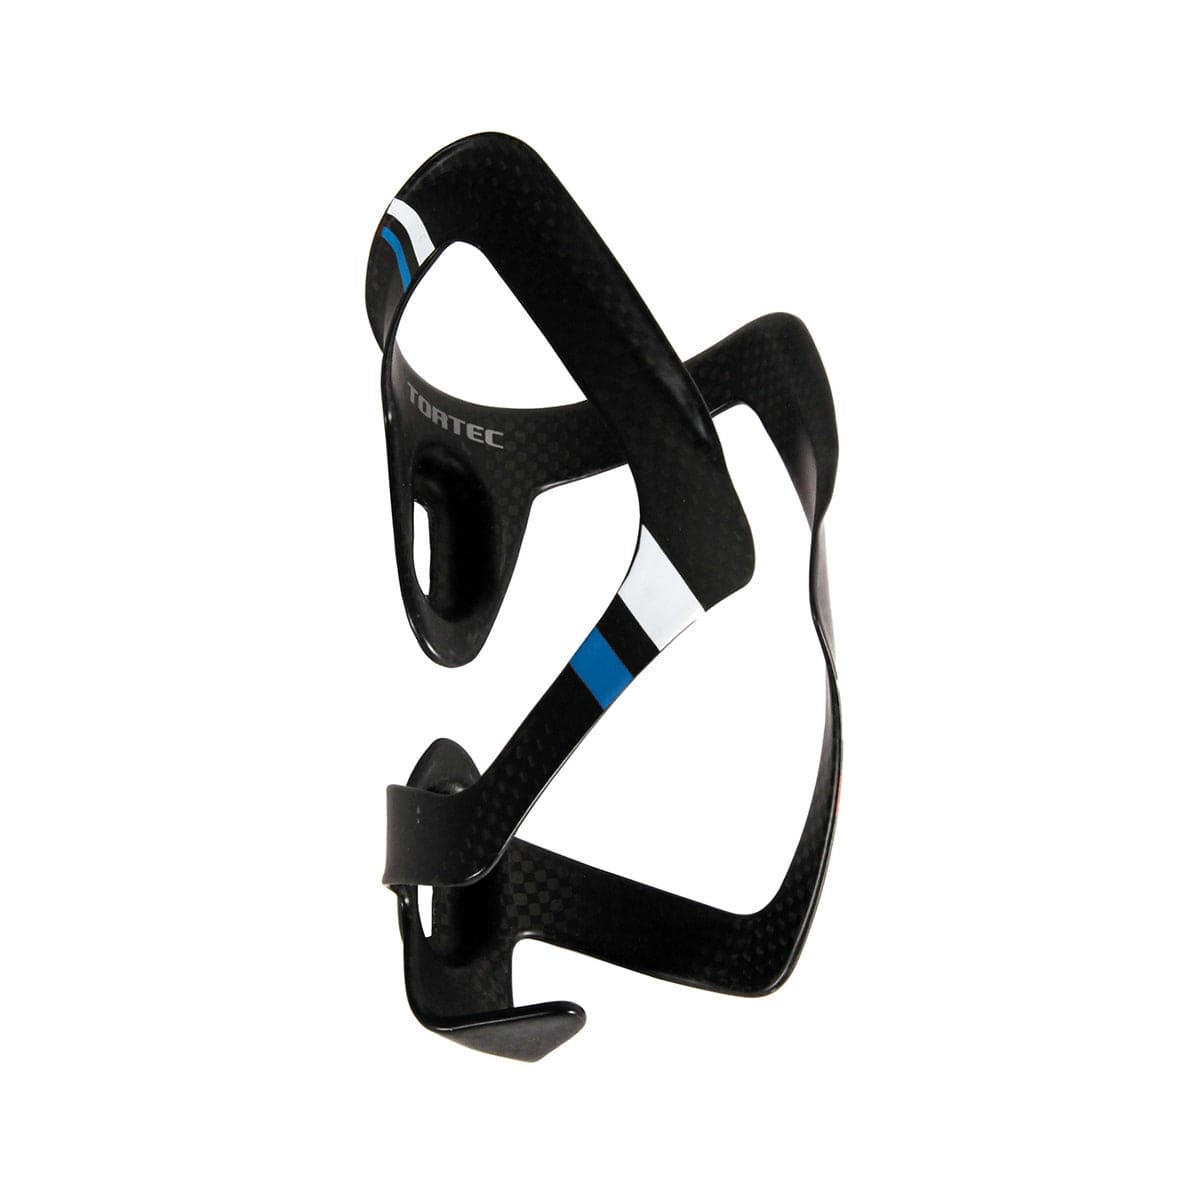 Cycle Tribe Colour Tortec Scala Cage